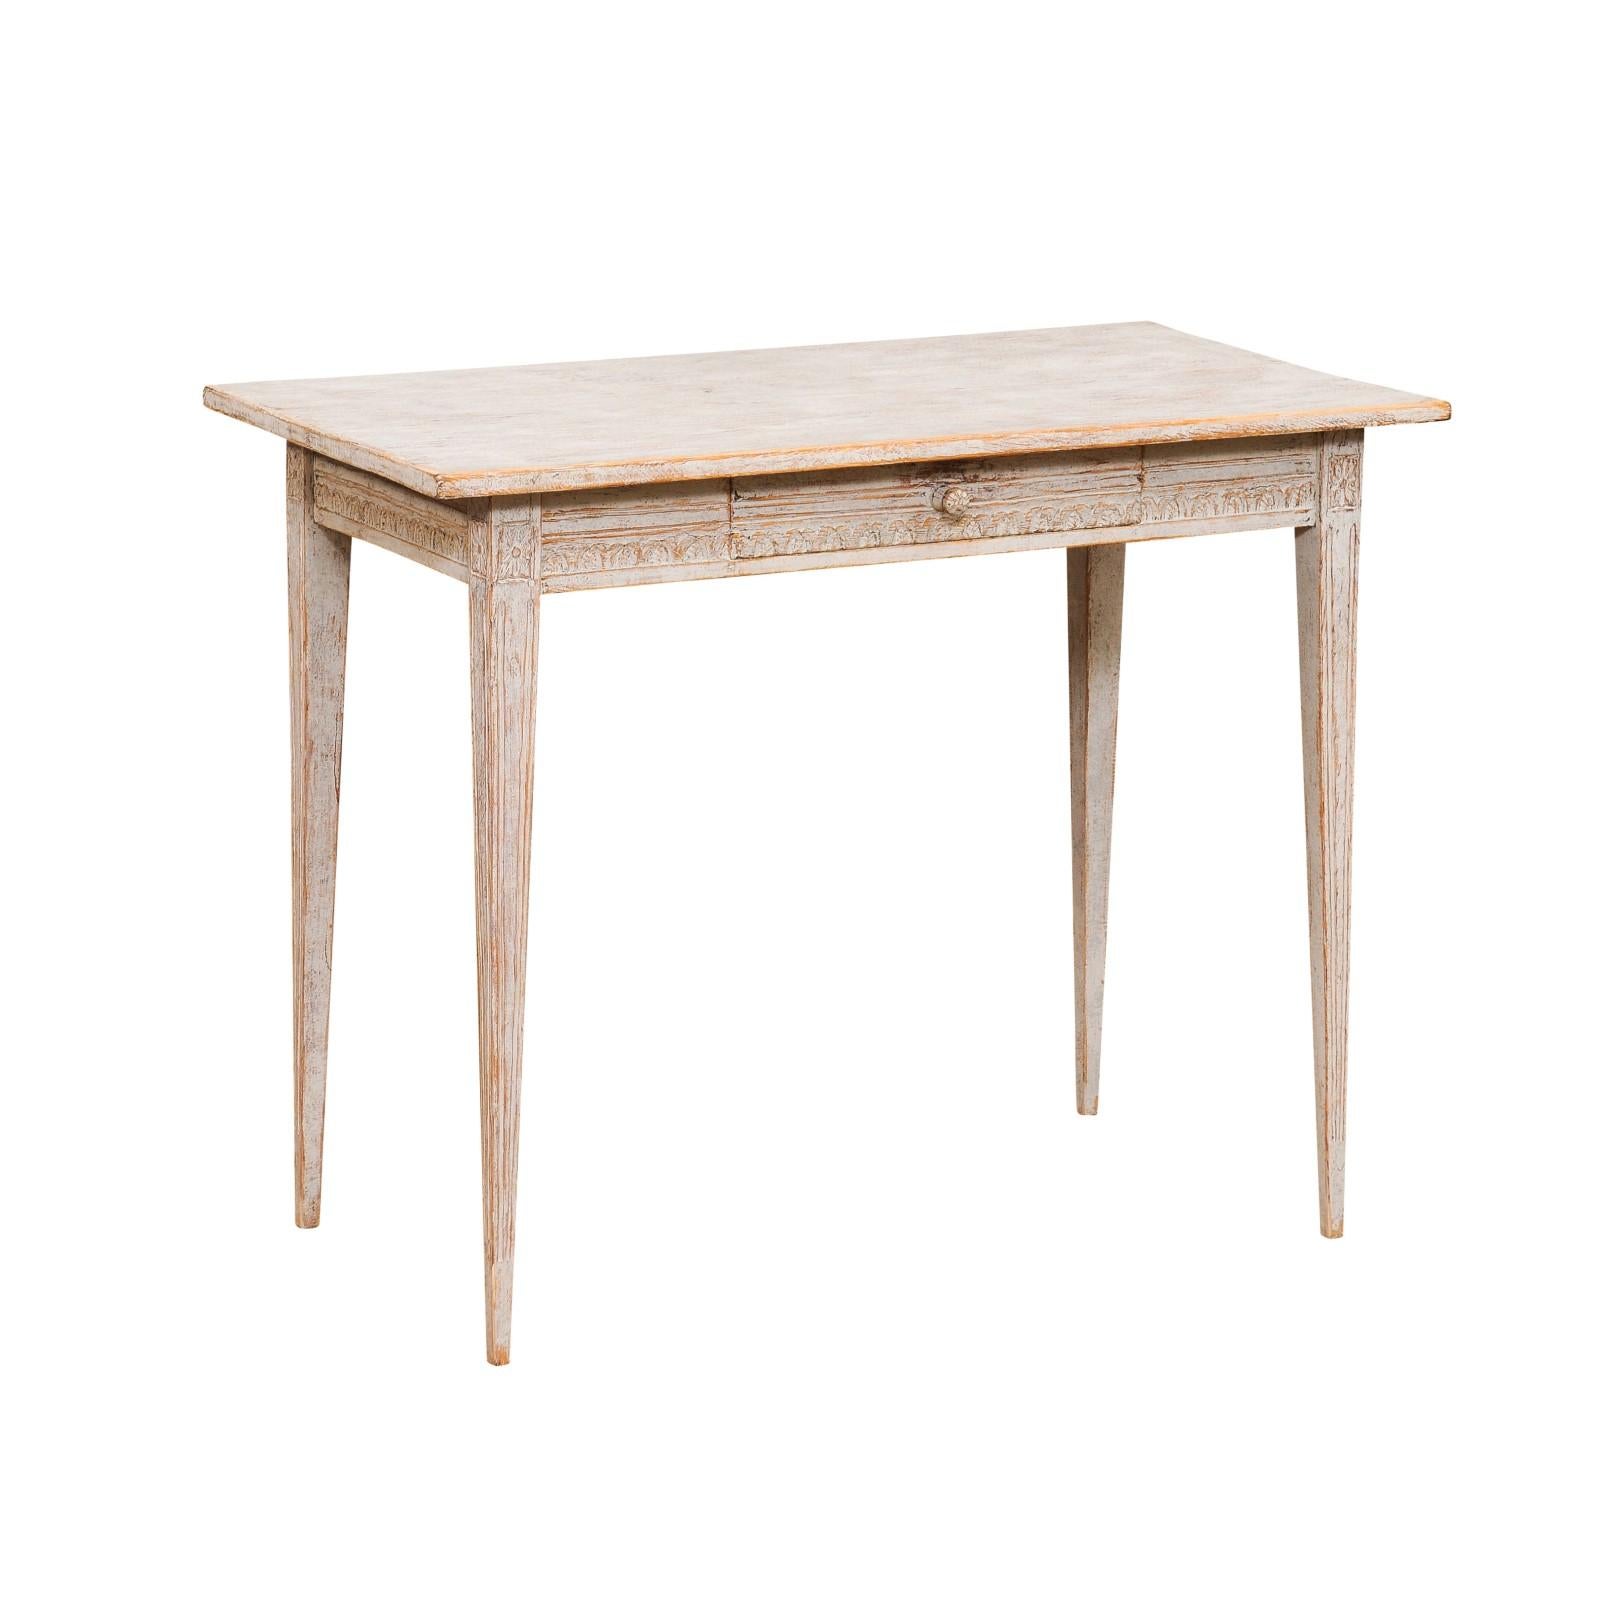 A Swedish Gustavian style wooden desk circa 1850 with carved apron, single drawer, tapered legs and distressed finish. Immerse yourself in the charm of 19th-century Scandinavia with this Swedish Gustavian style wooden desk, circa 1850. Boasting a